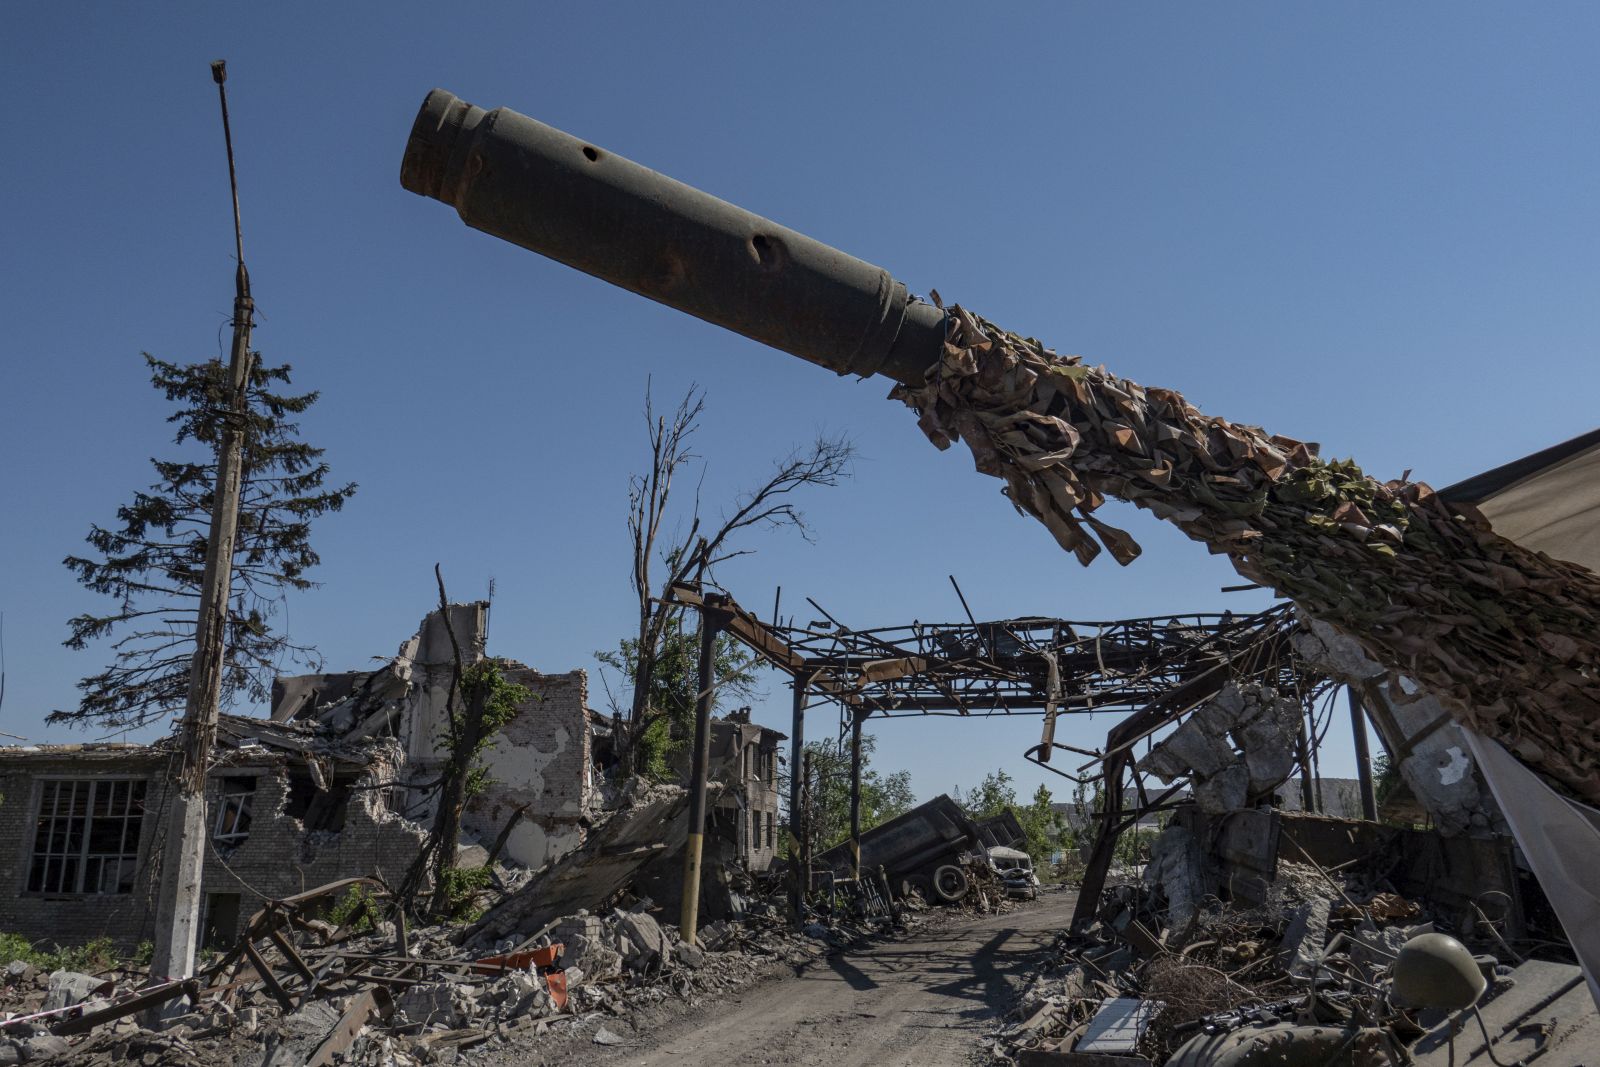 epa10011298 A picture taken during a visit to Mariupol organized by the Russian military shows a general view of the destroyed entrance to the Azovstal steel plant in Mariupol, eastern Ukraine, 13 June 2022. According to a statement by the Ukrainian Presidential Office on 06 June quoting President Zelensky, there may be more than 2,500 prisoners from the Azovstal plant being held captive by Russian forces. On 24 February Russian troops entered Ukrainian territory starting a conflict that has provoked destruction and a humanitarian crisis.  EPA/SERGEI ILNITSKY